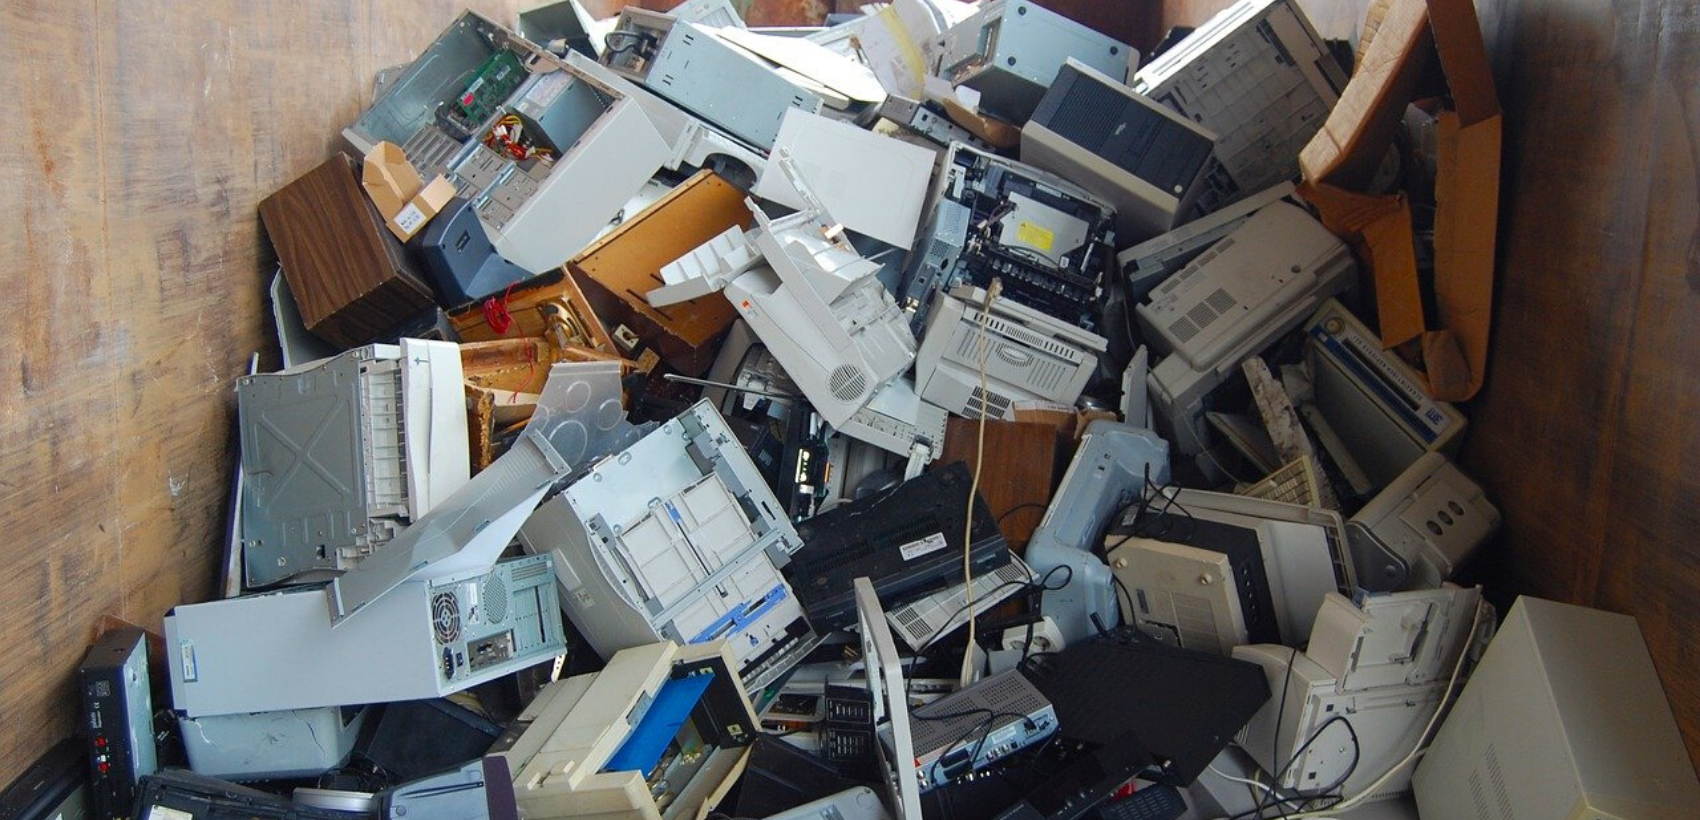 Scrap and electronic waste disposal and recycling in Hyderabad 